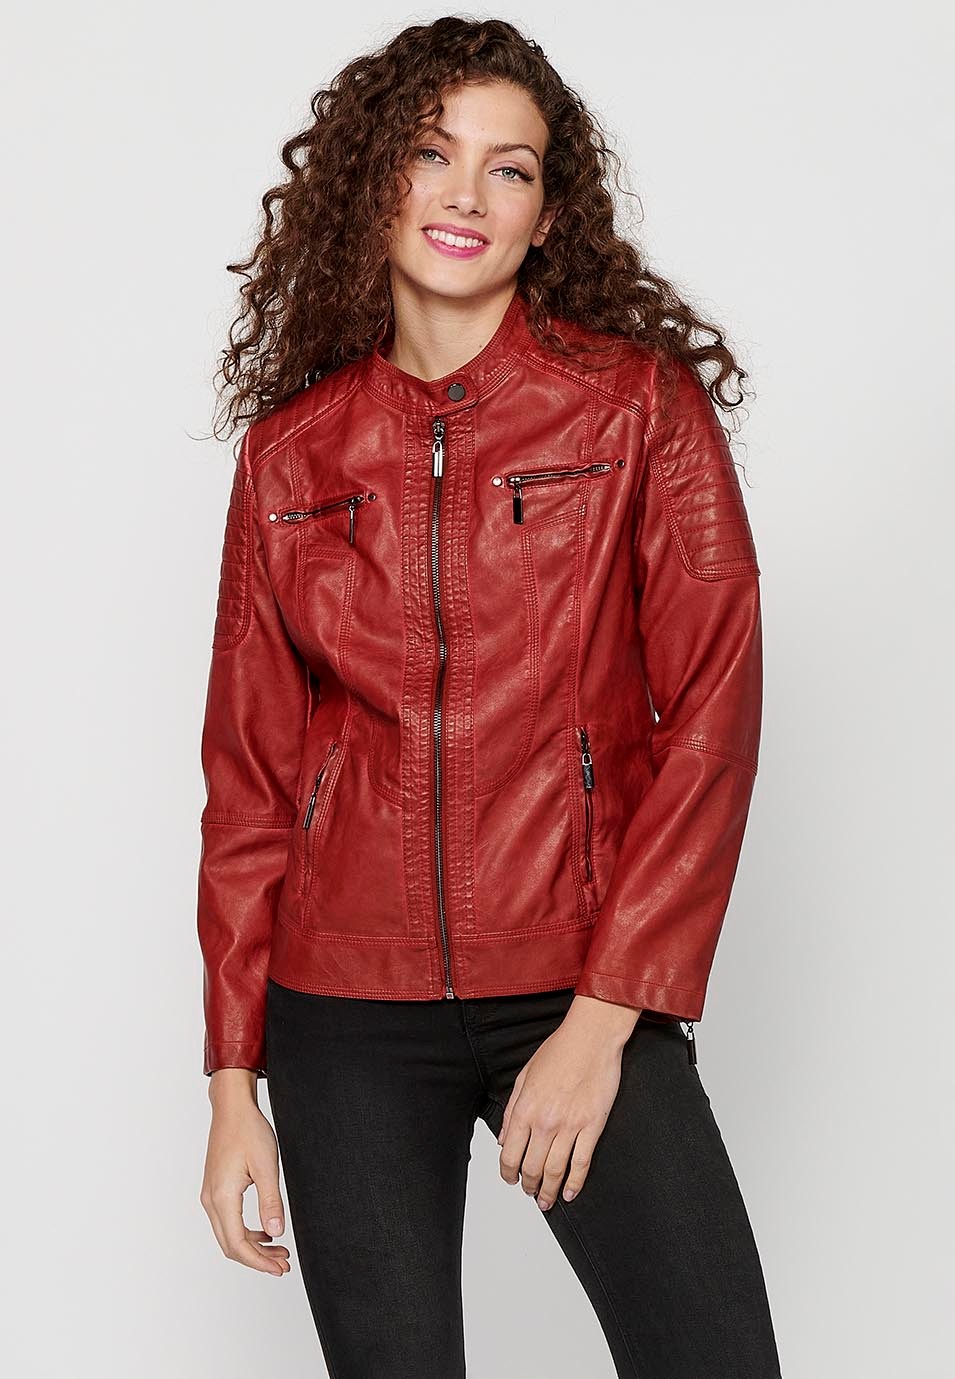 Women's Red Long Sleeve Round Neck Zipper Front Closure Jacket